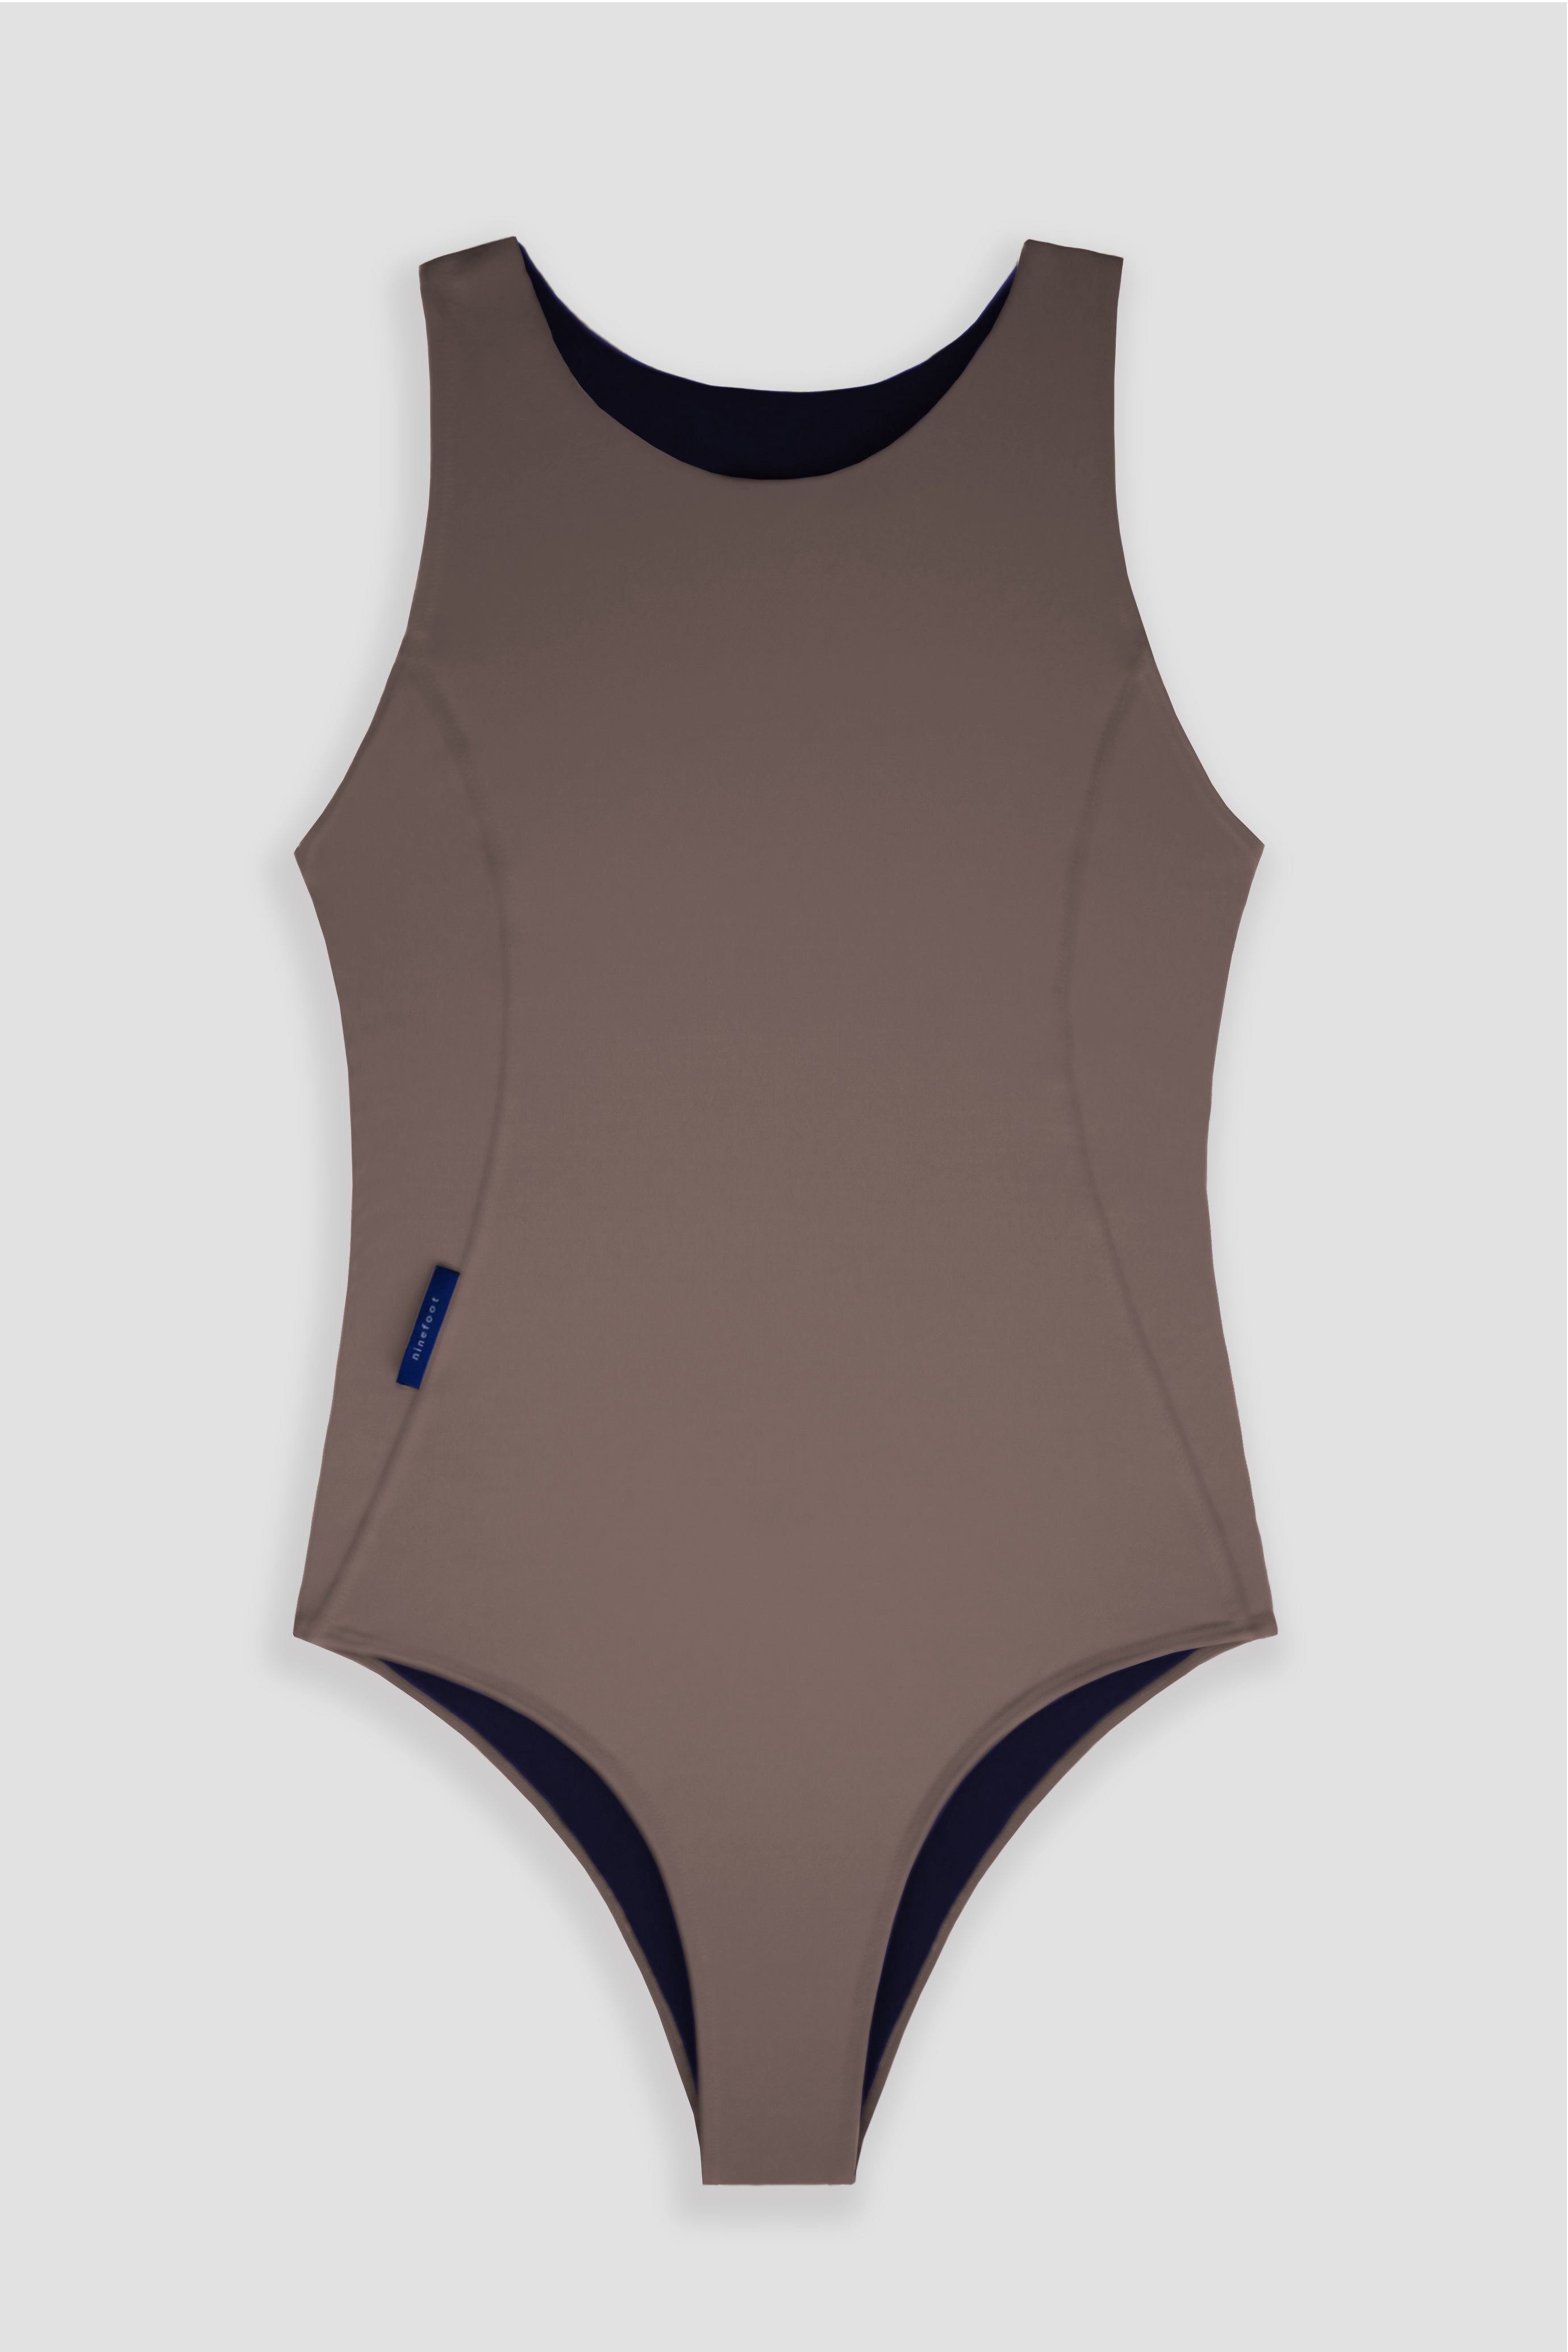 Krui Onepiece Surf Swimsuit in Tripoli Flat photo front